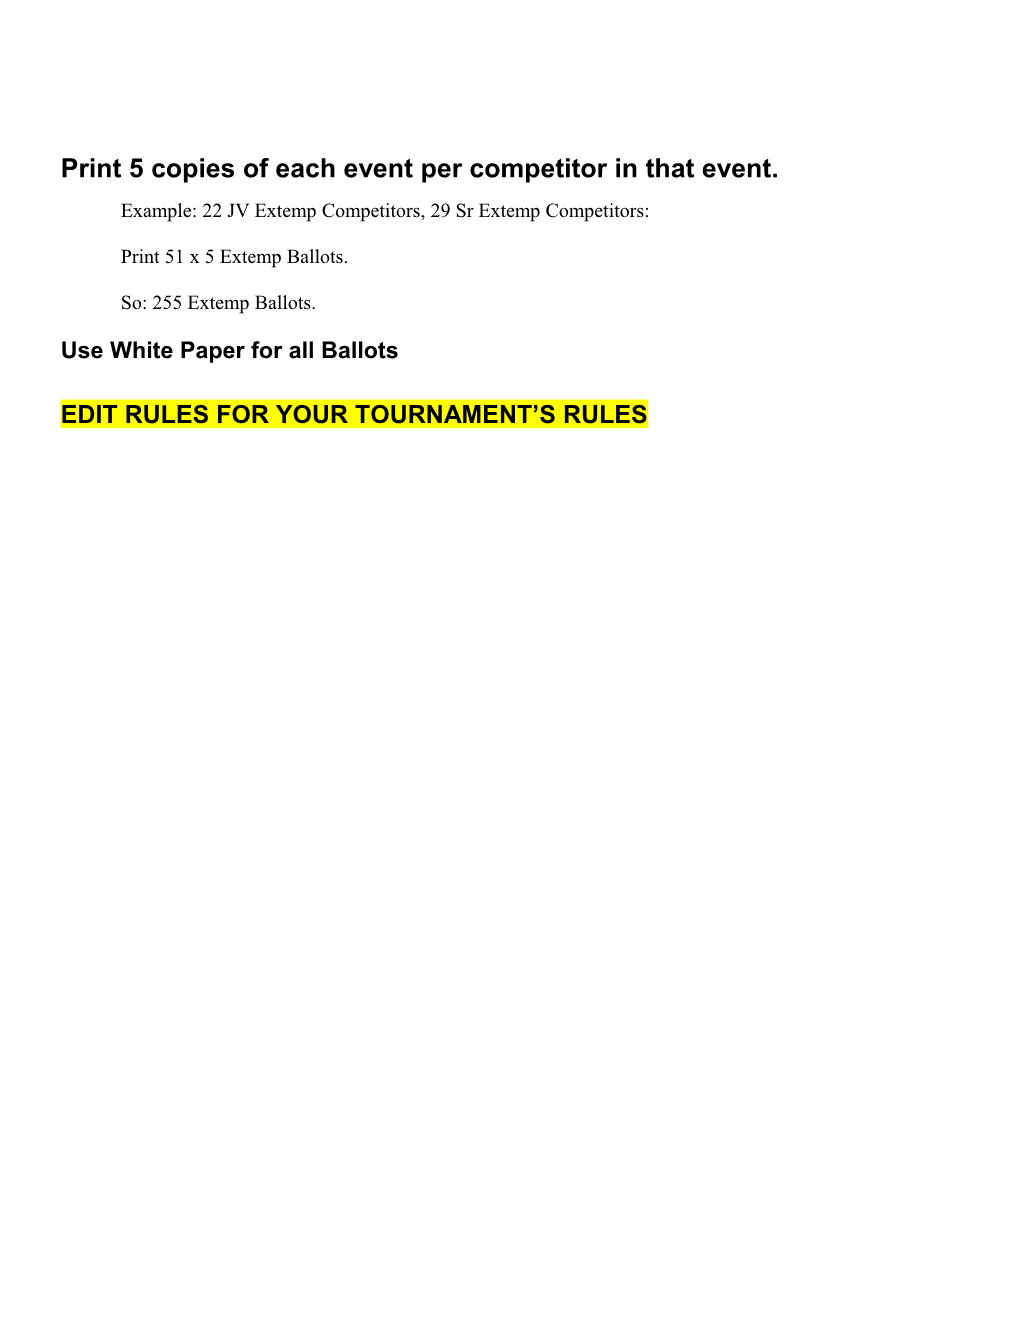 Print 5 Copies of Each Event Per Competitor in That Event